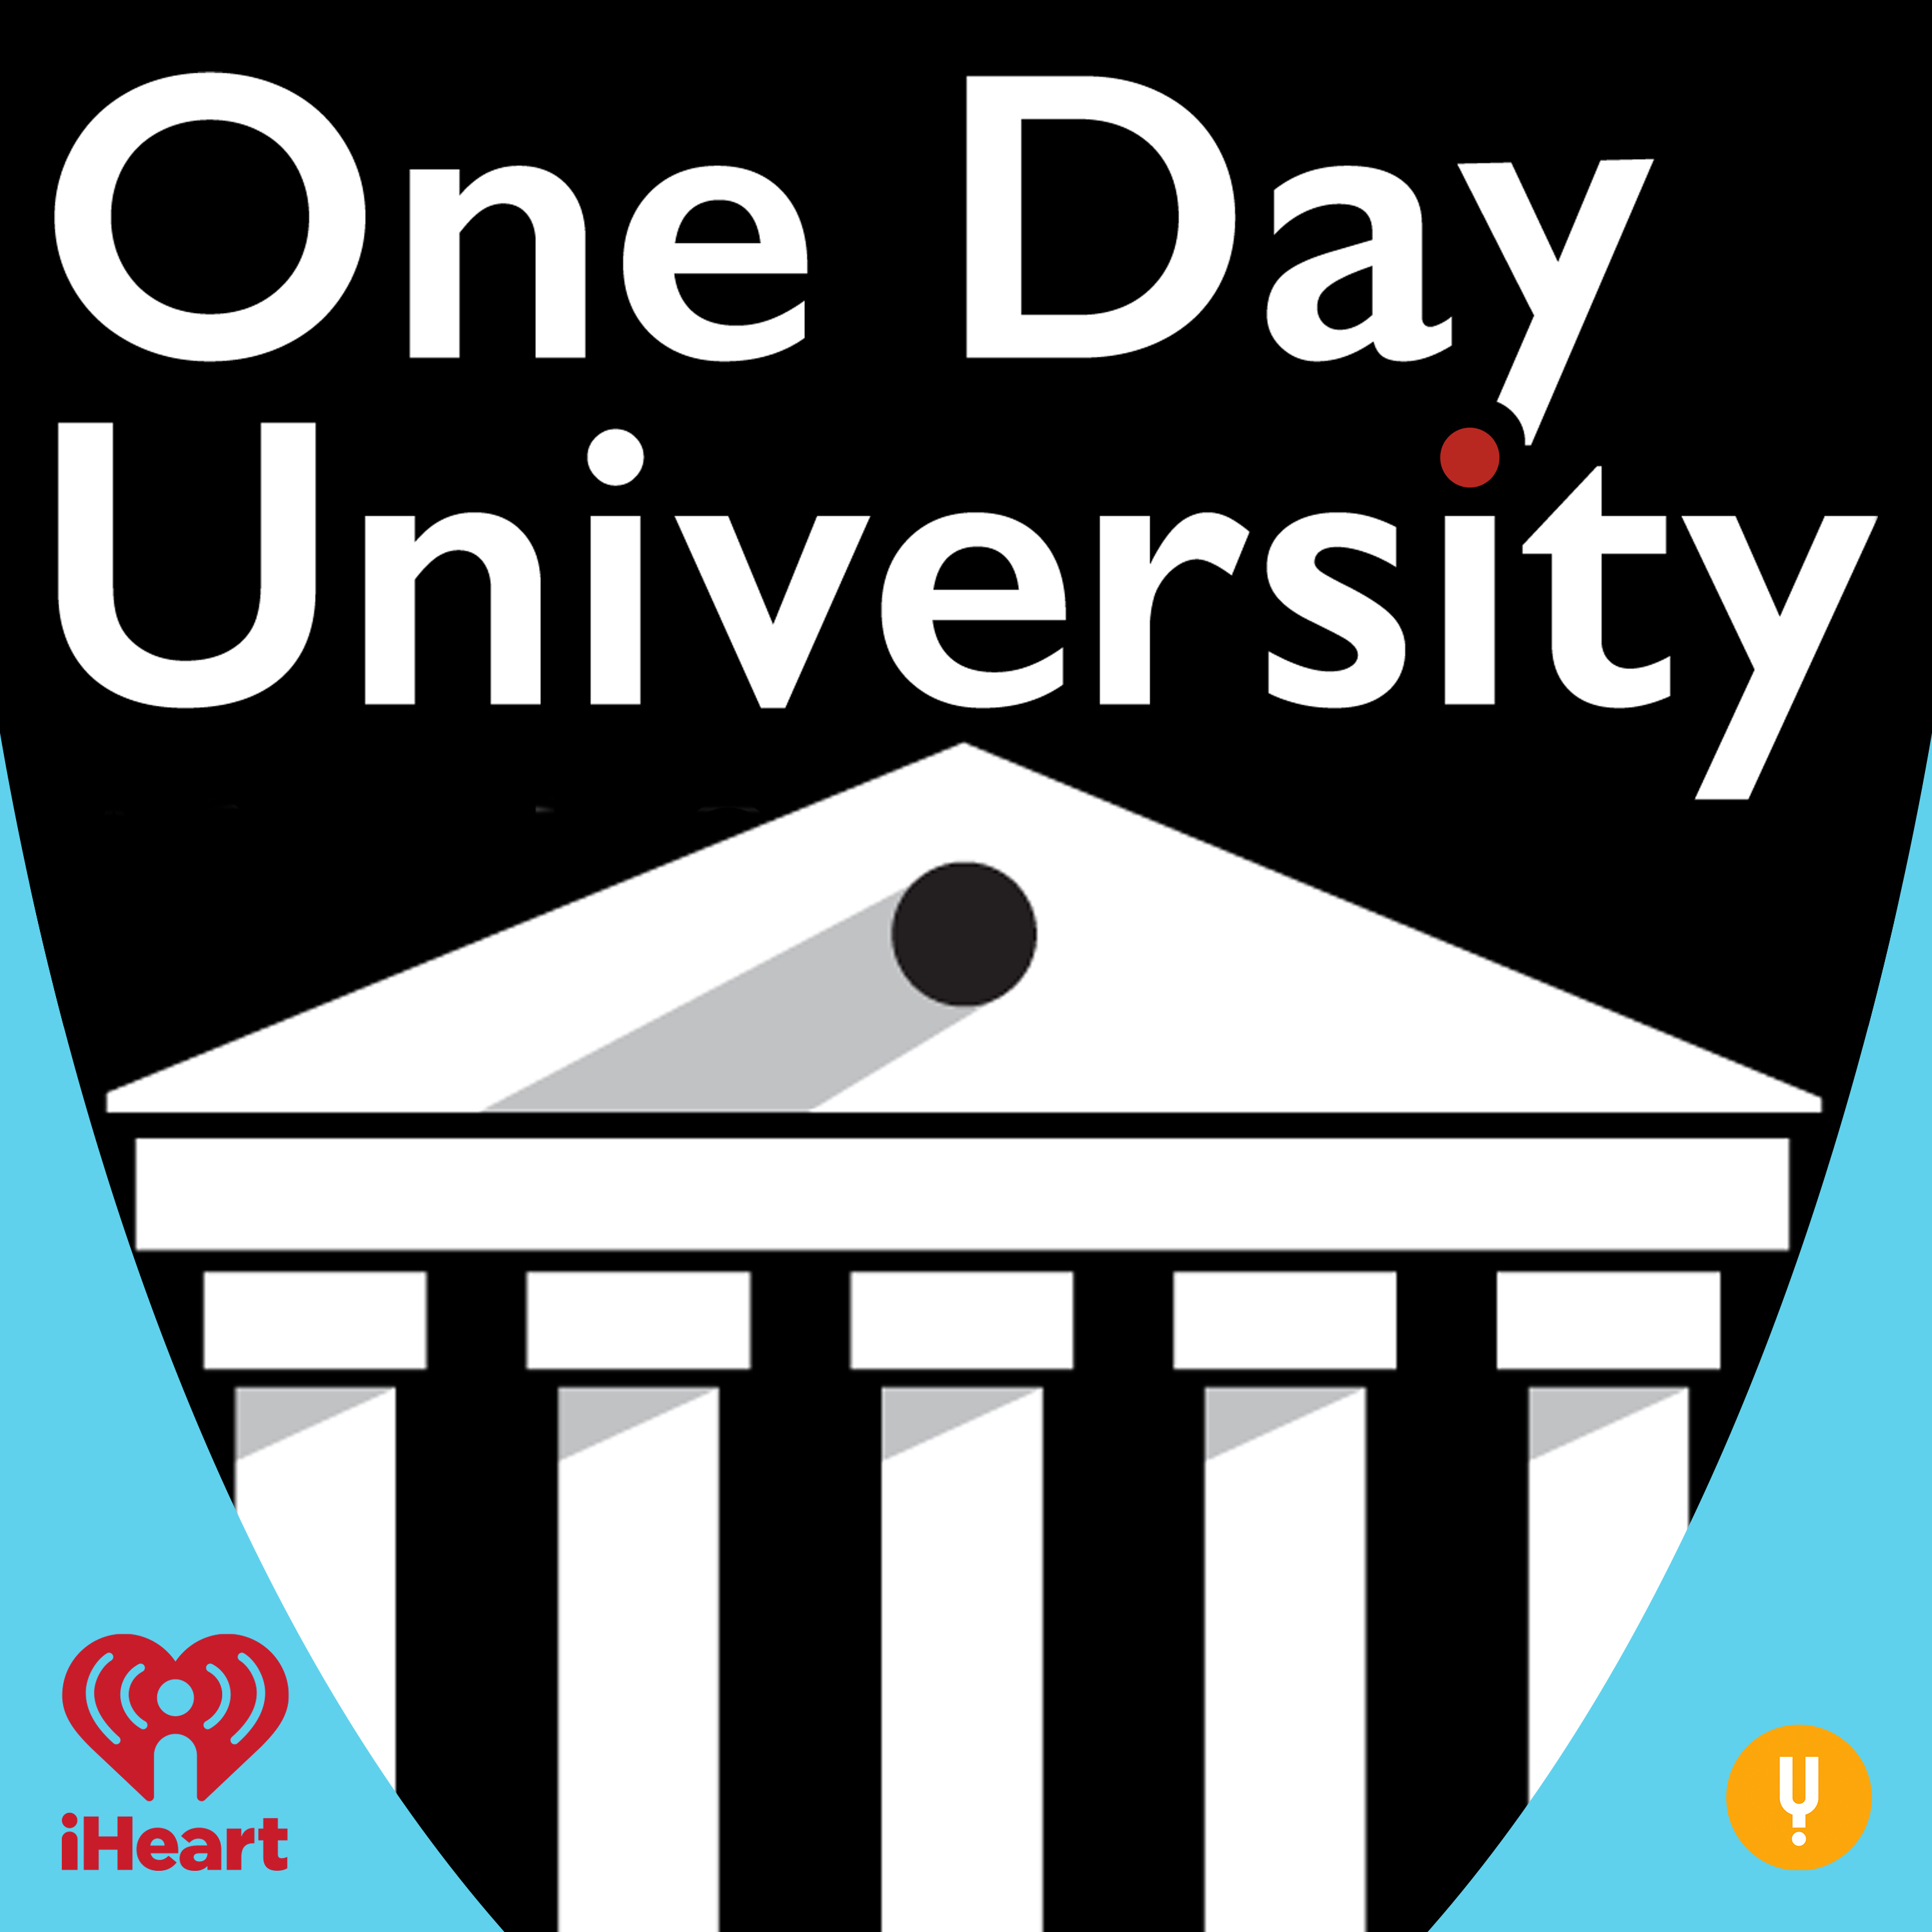 Introducing: One Day University